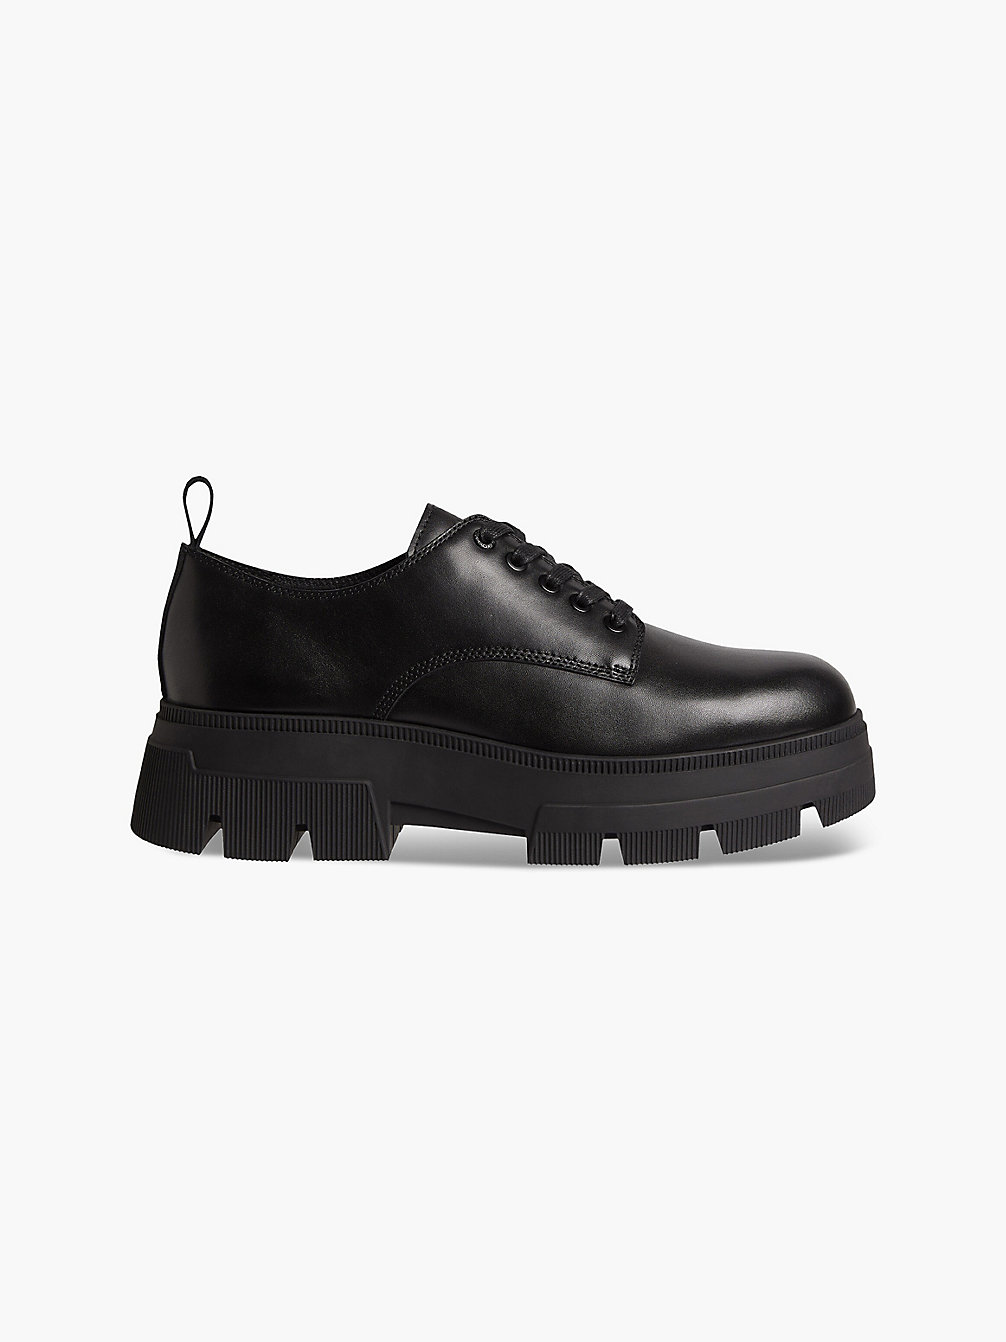 BLACK Leather Chunky Lace-Up Shoes undefined men Calvin Klein